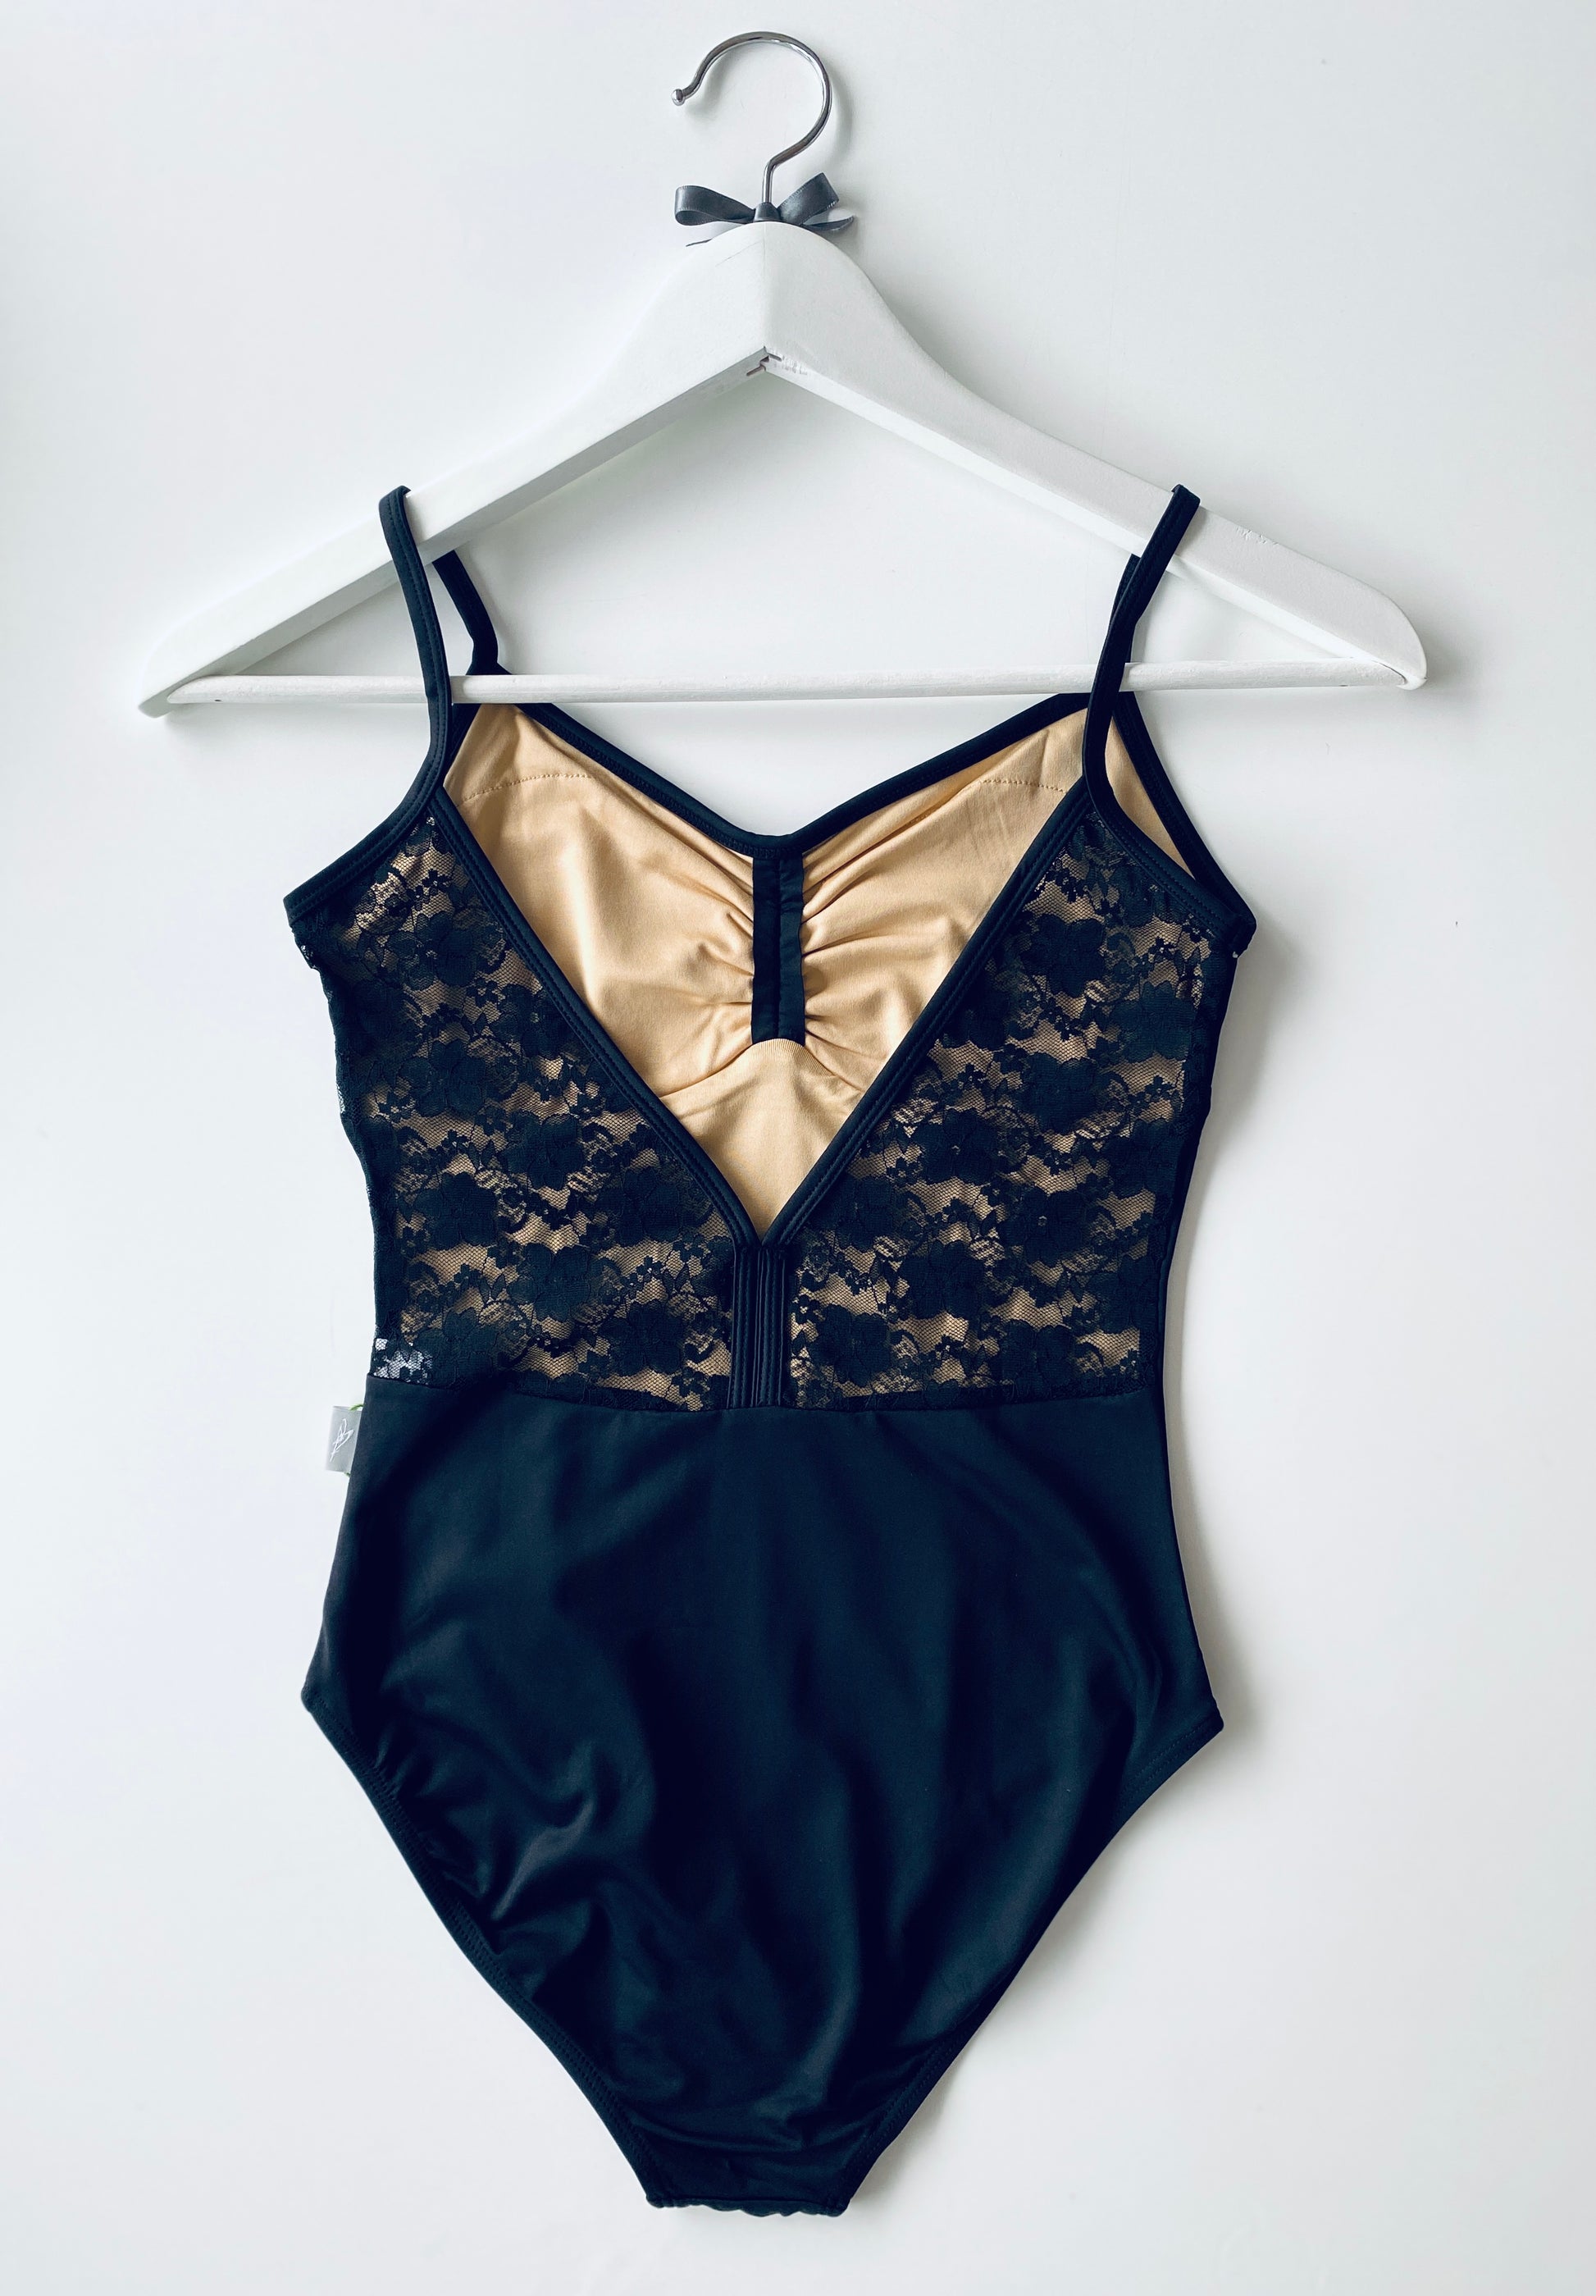 Baiwu The Classic Camisole with Lace Back - Black from The Collective Dancewear